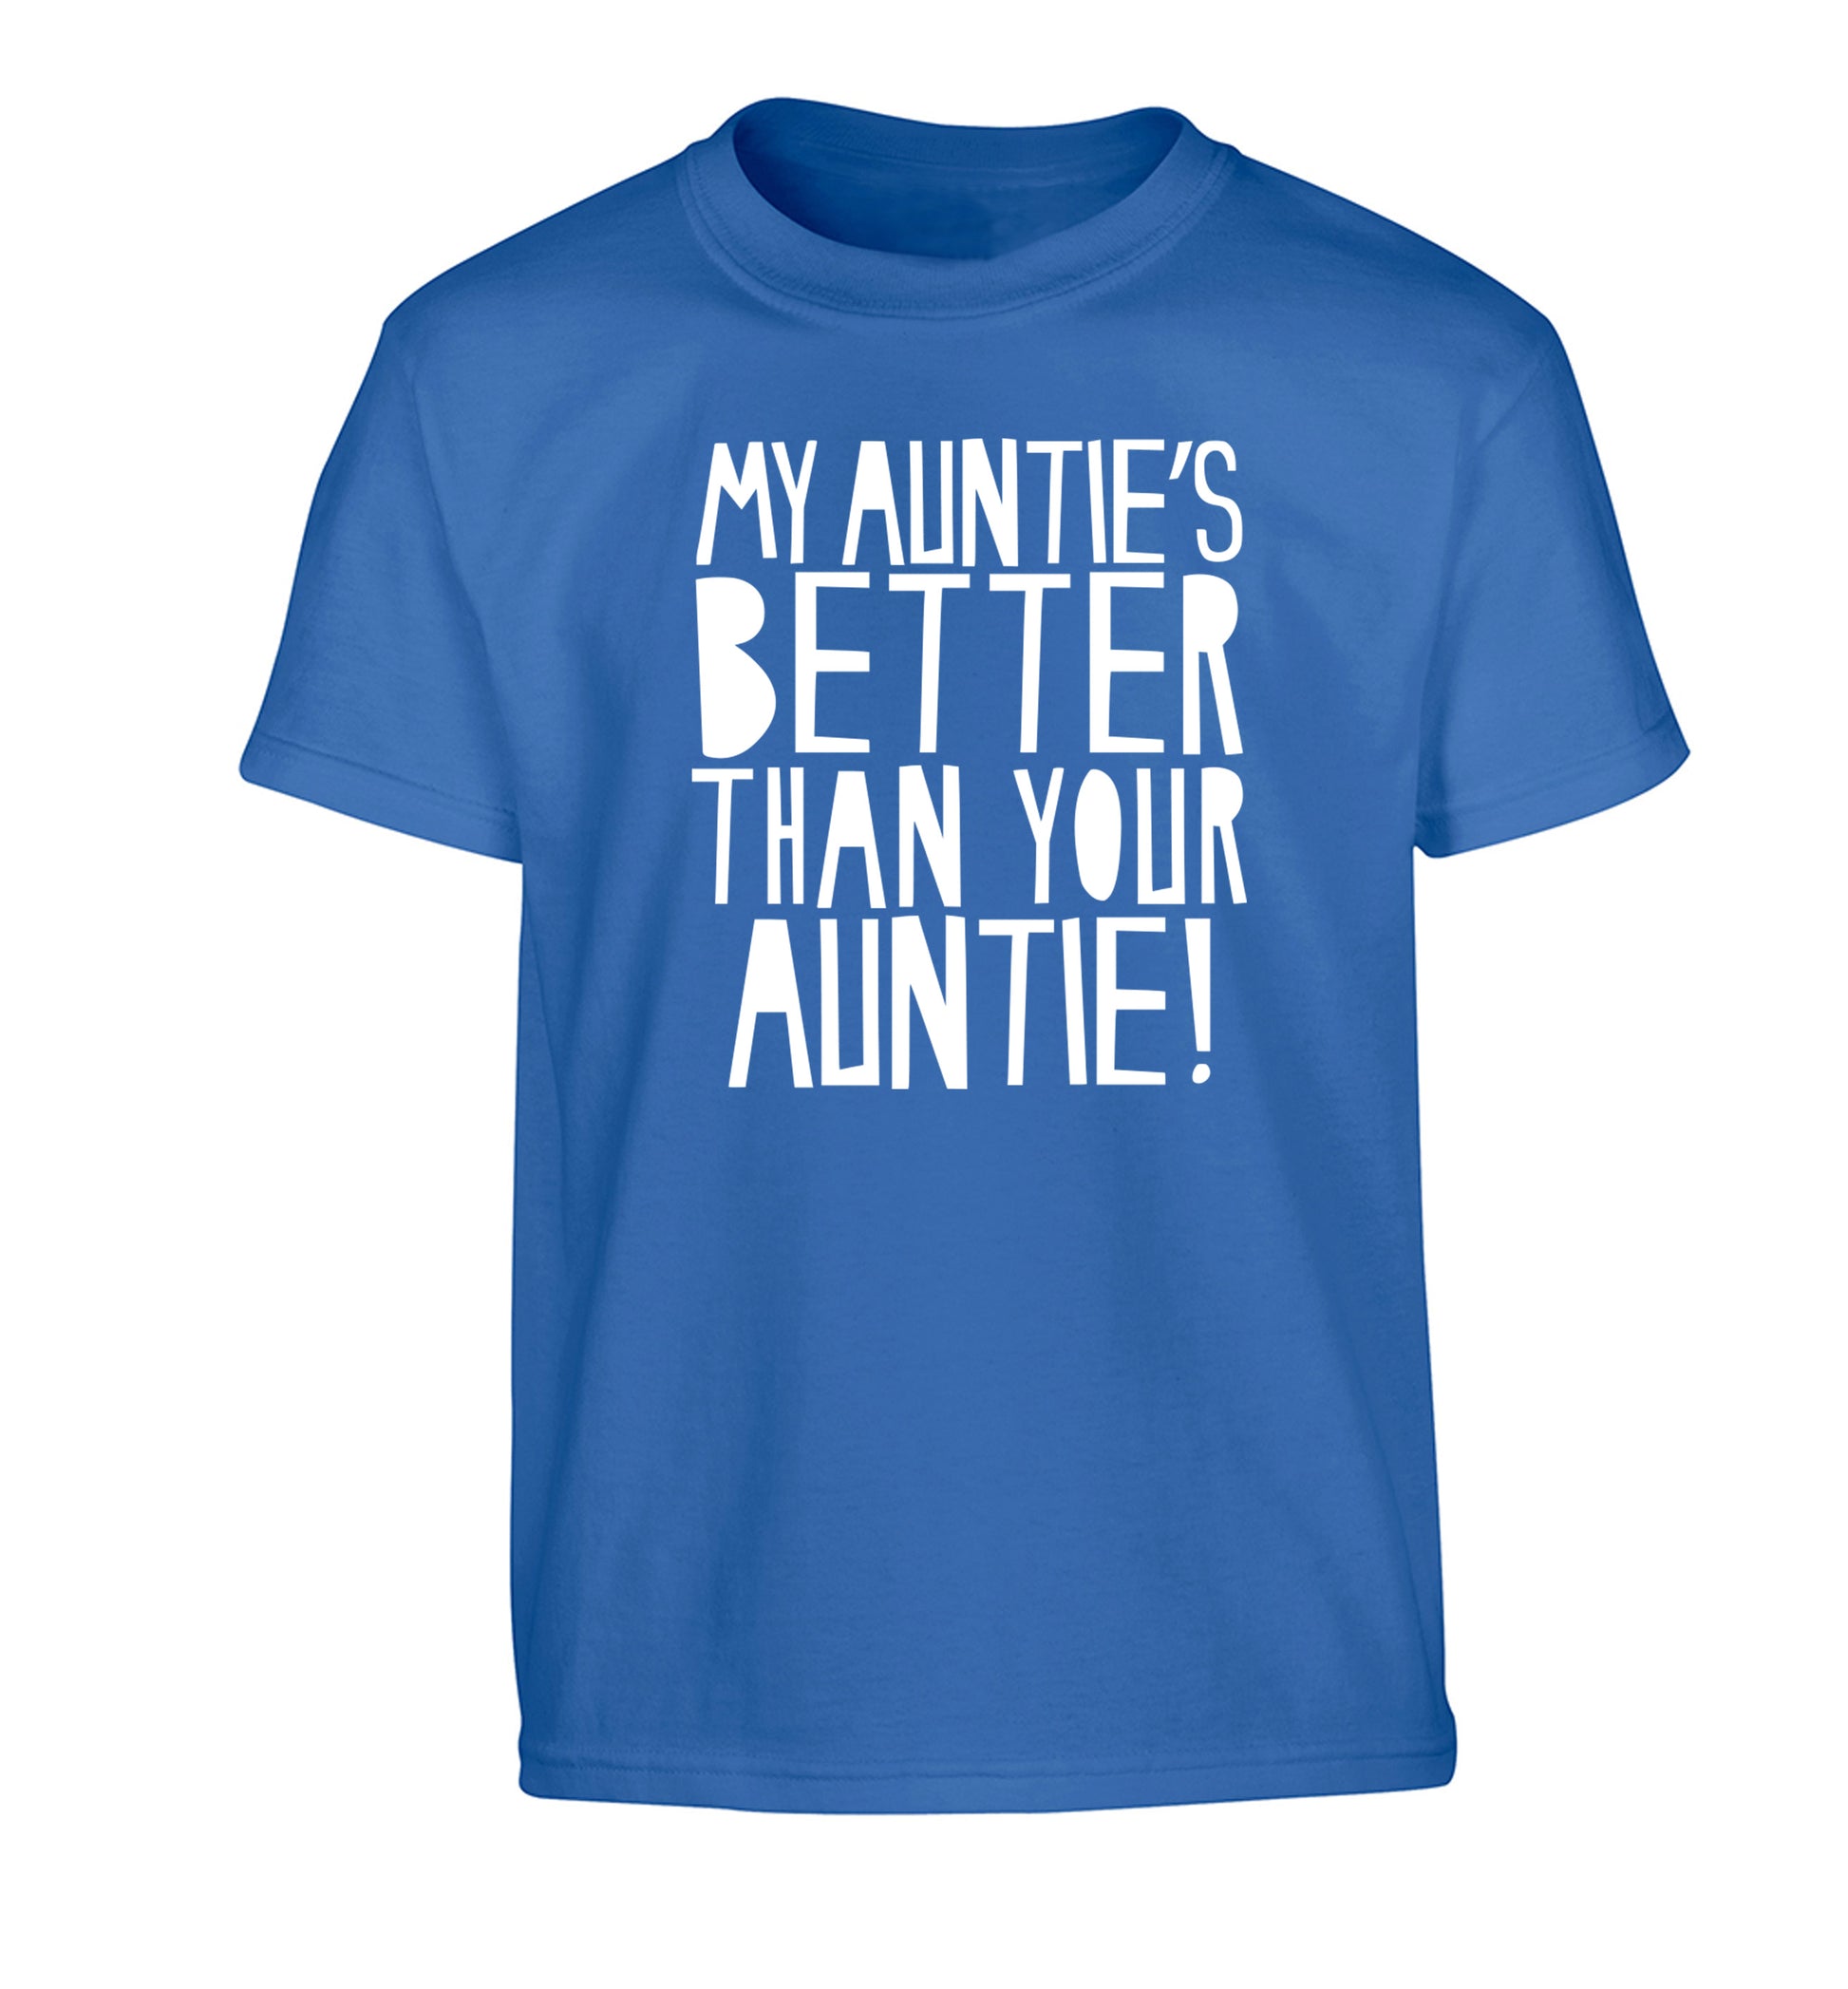 My auntie's better than your auntie Children's blue Tshirt 12-13 Years